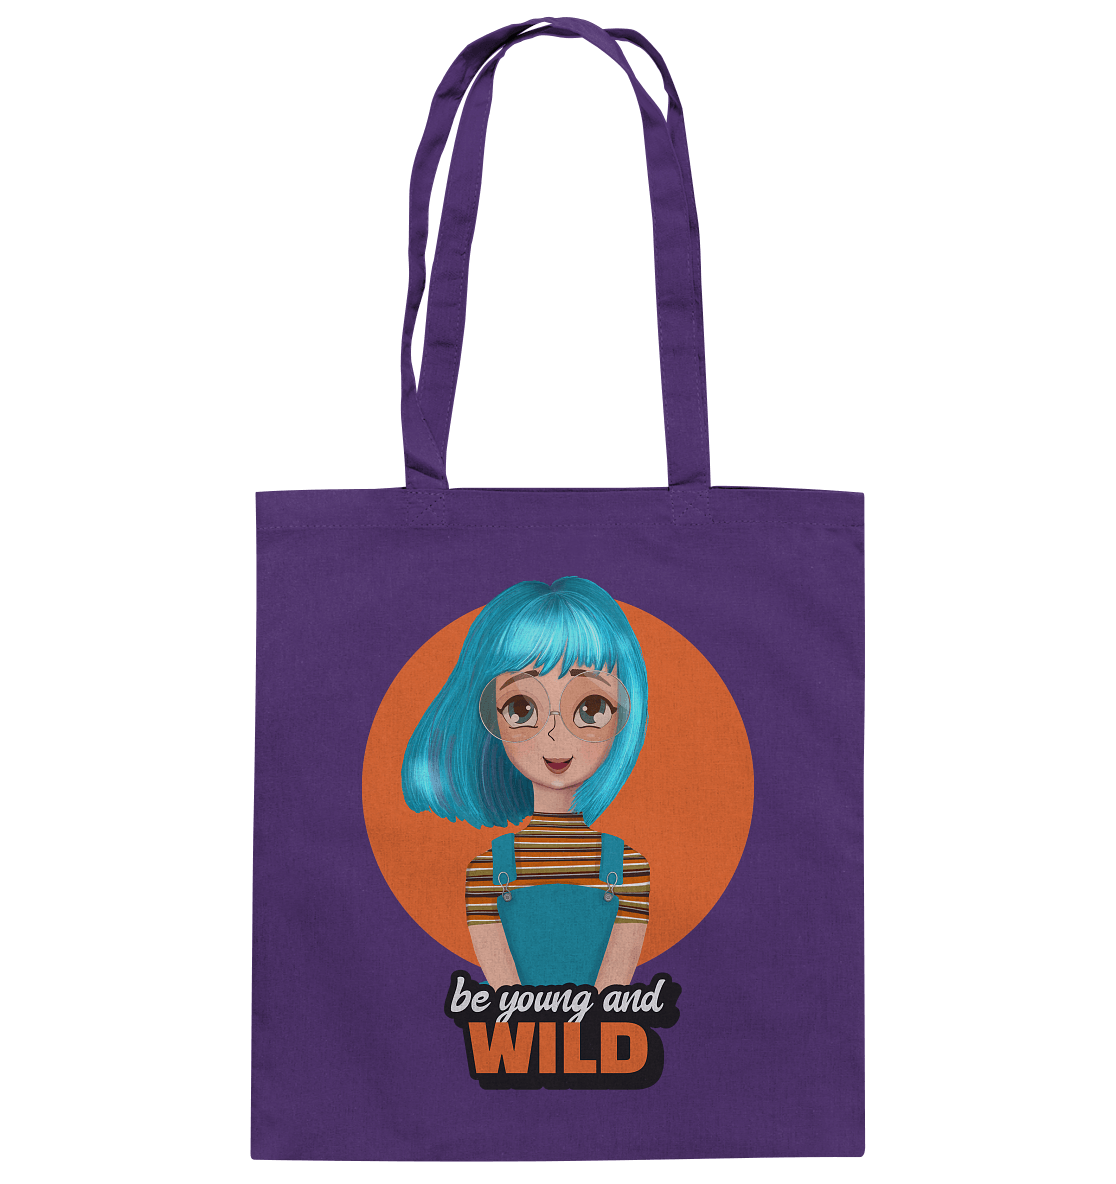 CArtoon Stofftasche be young and wild mit Cartoon Girl türkis Tasche in Lila